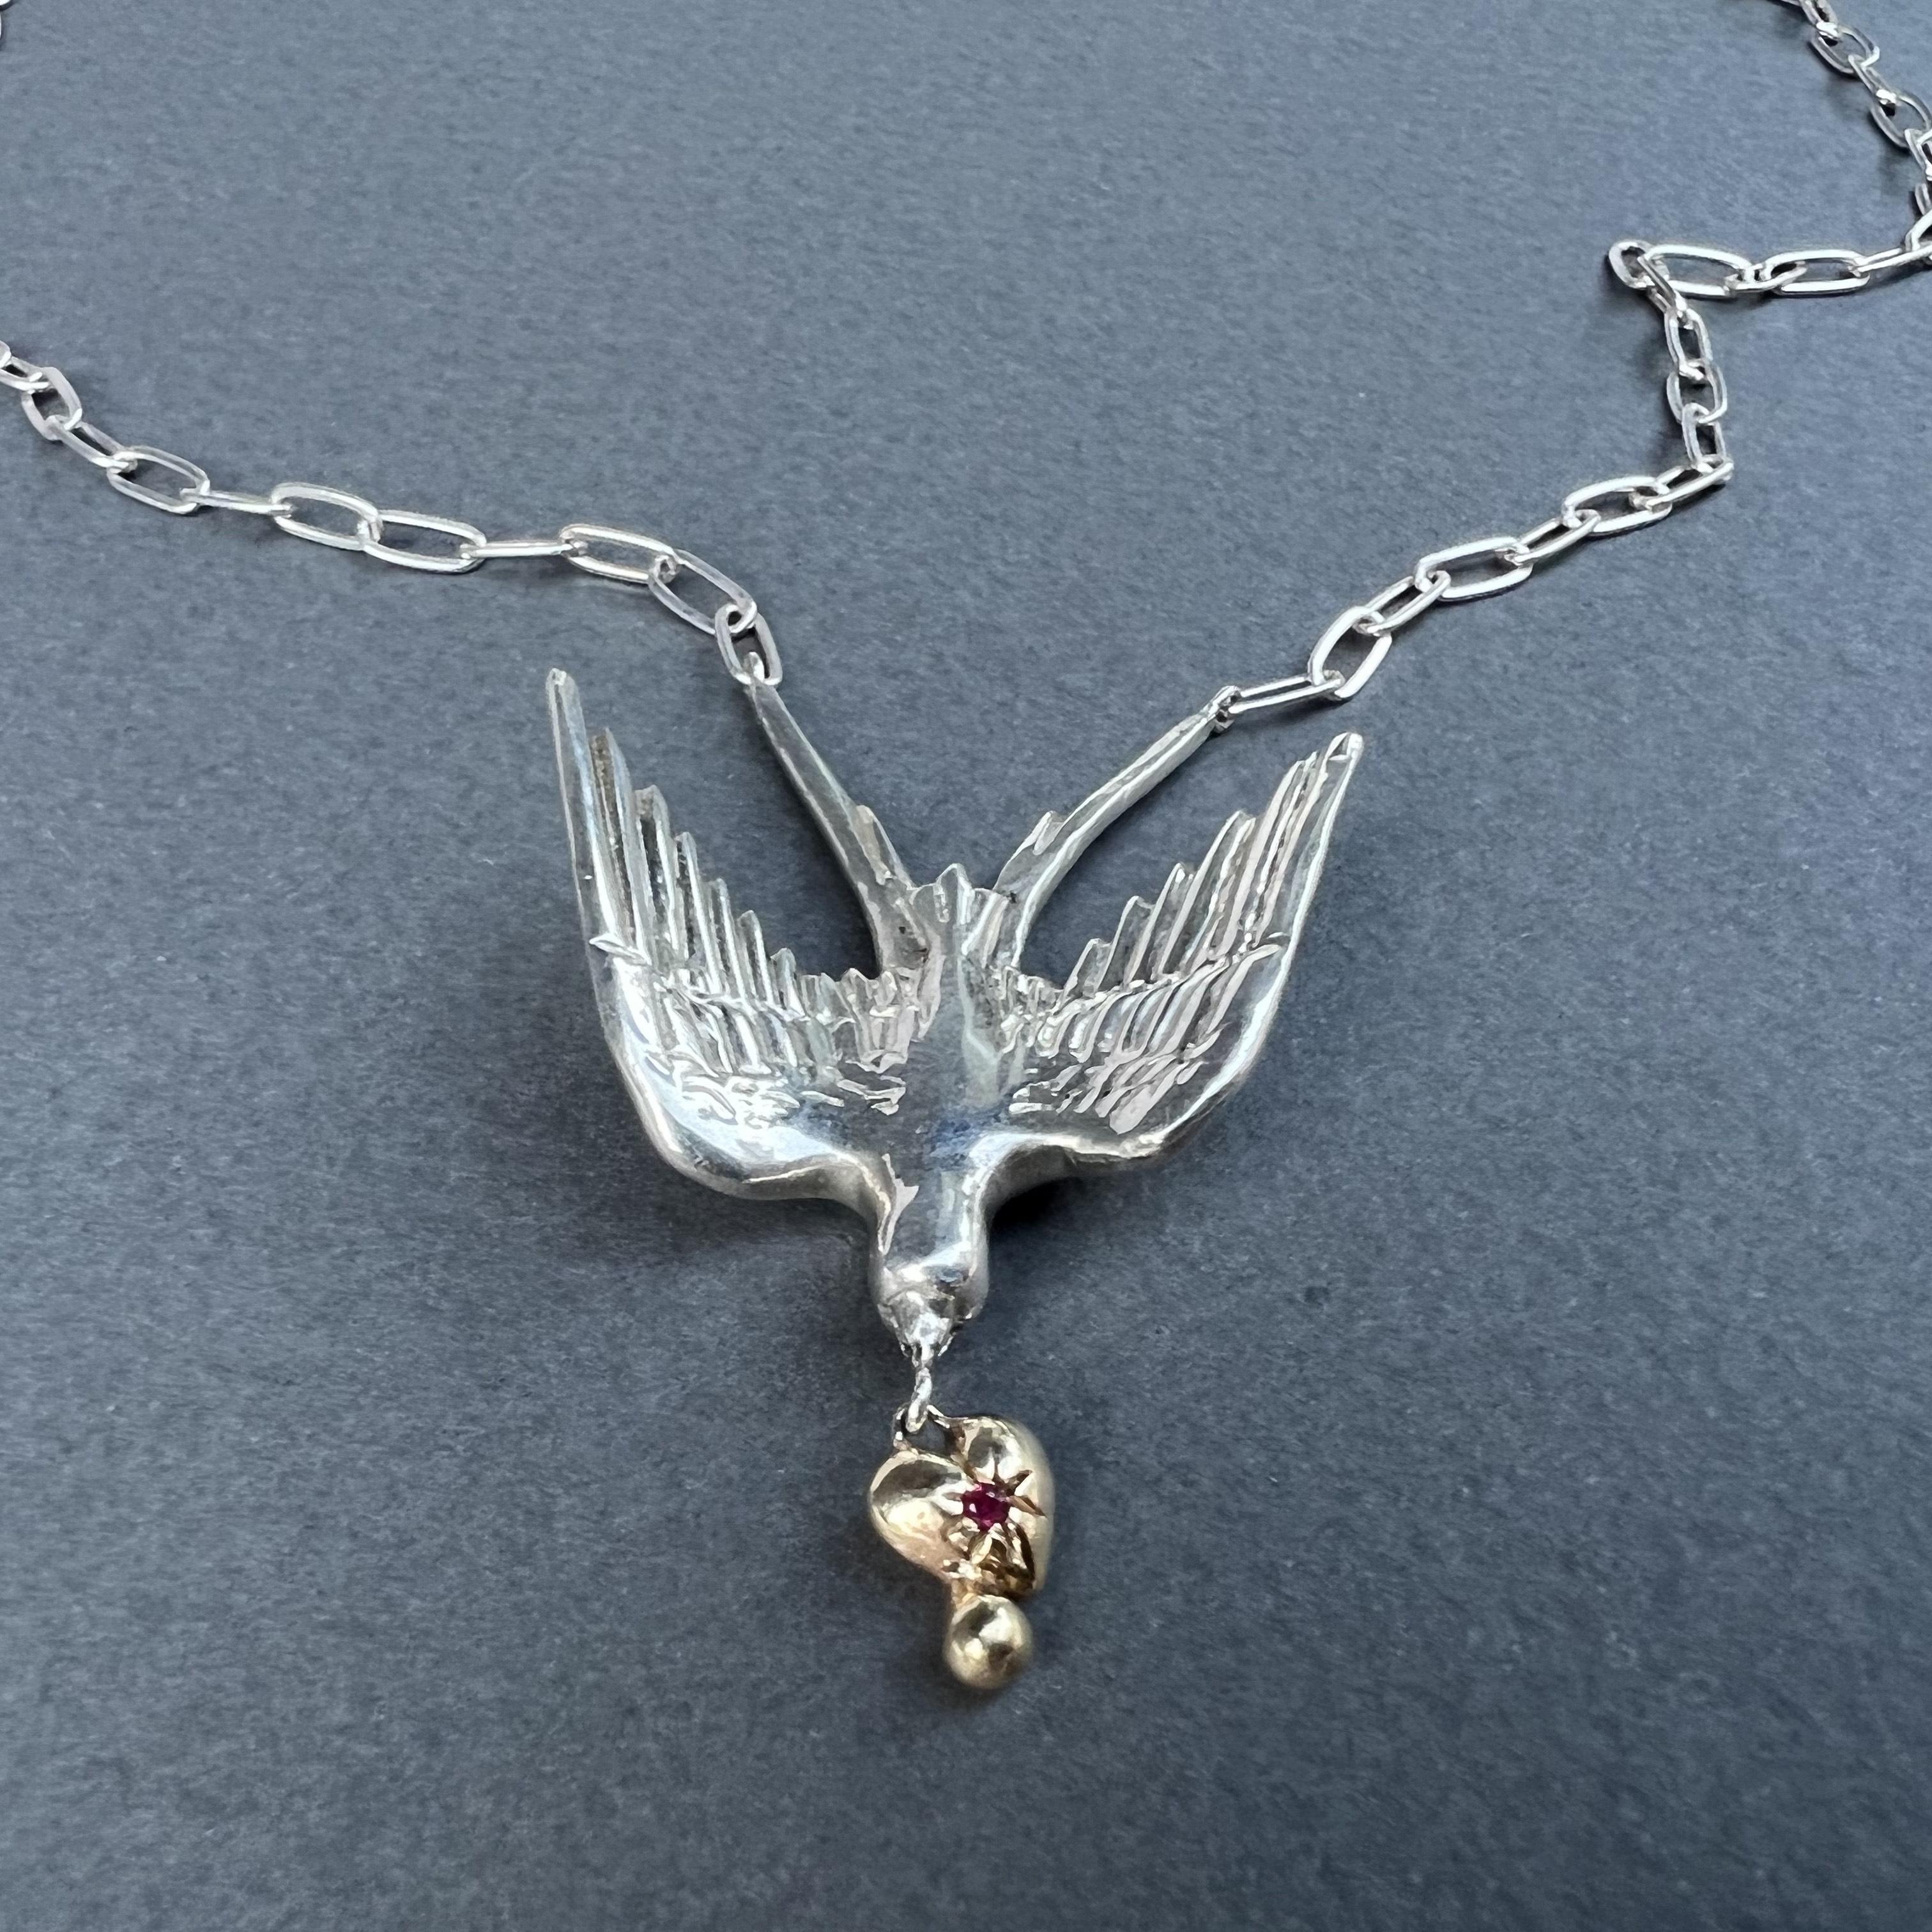 Romantic Dove Chain Necklace Gold Heart Silver Ruby Victorian Style Animal jewelry For Sale